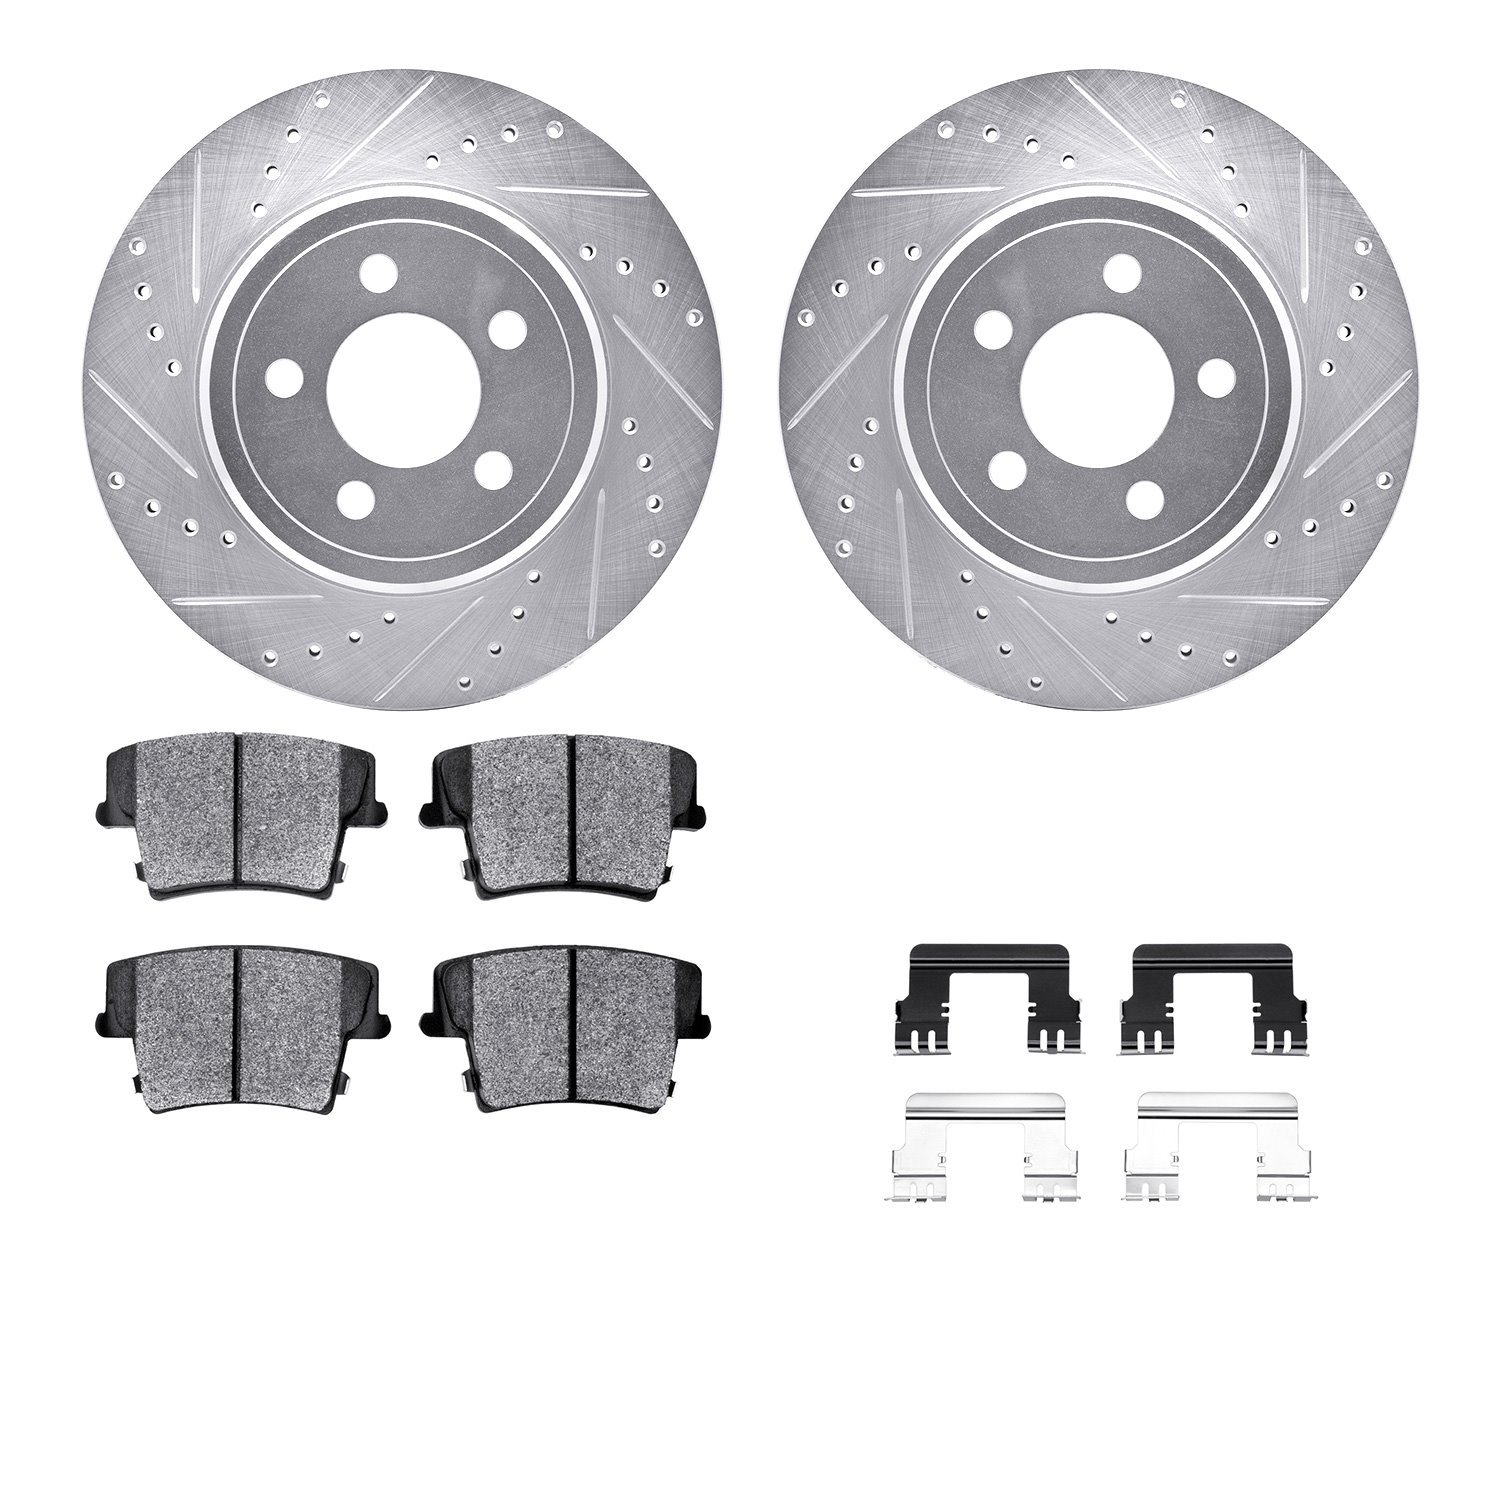 7212-39037 Drilled/Slotted Rotors w/Heavy-Duty Brake Pads Kit & Hardware [Silver], Fits Select Mopar, Position: Rear